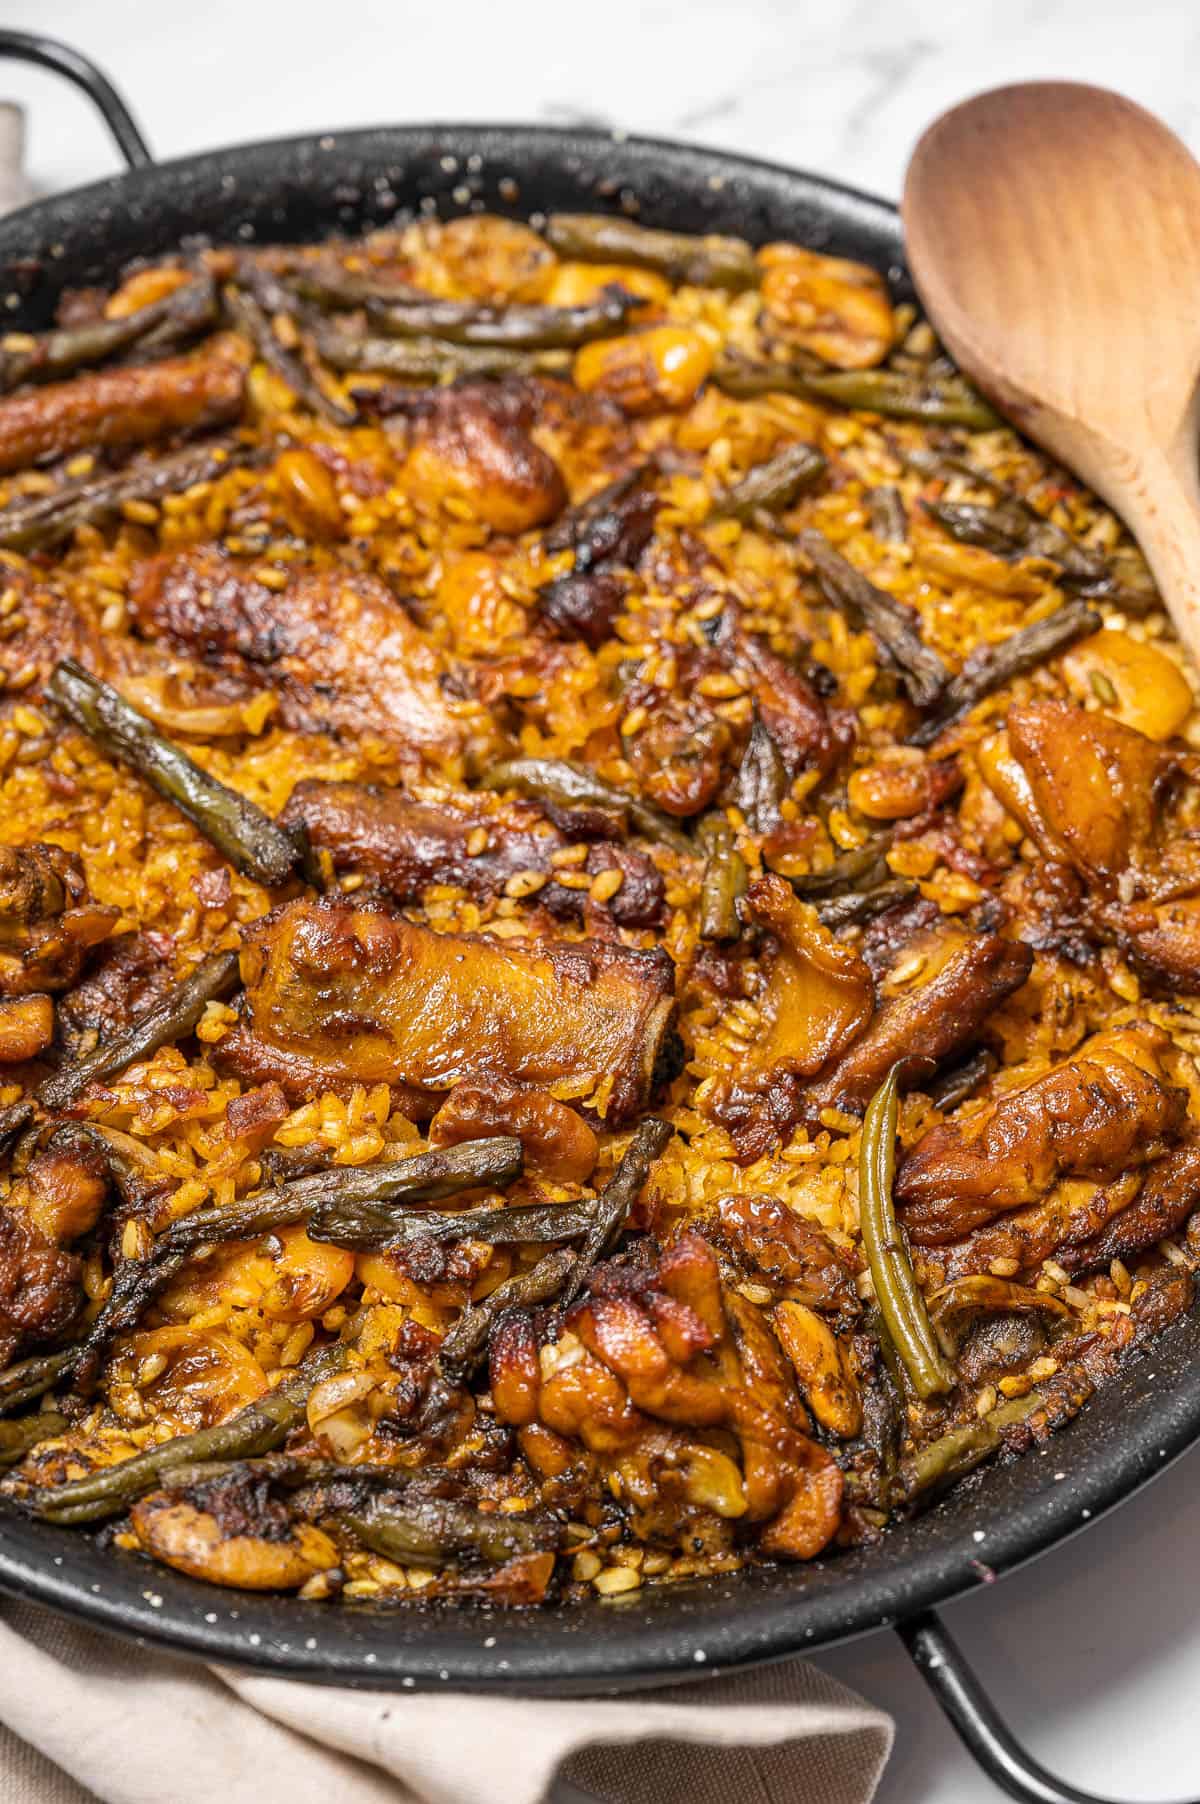 Paella Valenciana with chicken, ribs, and green beans. A traditional Spanish meat paella with a wooden spoon resting on top.